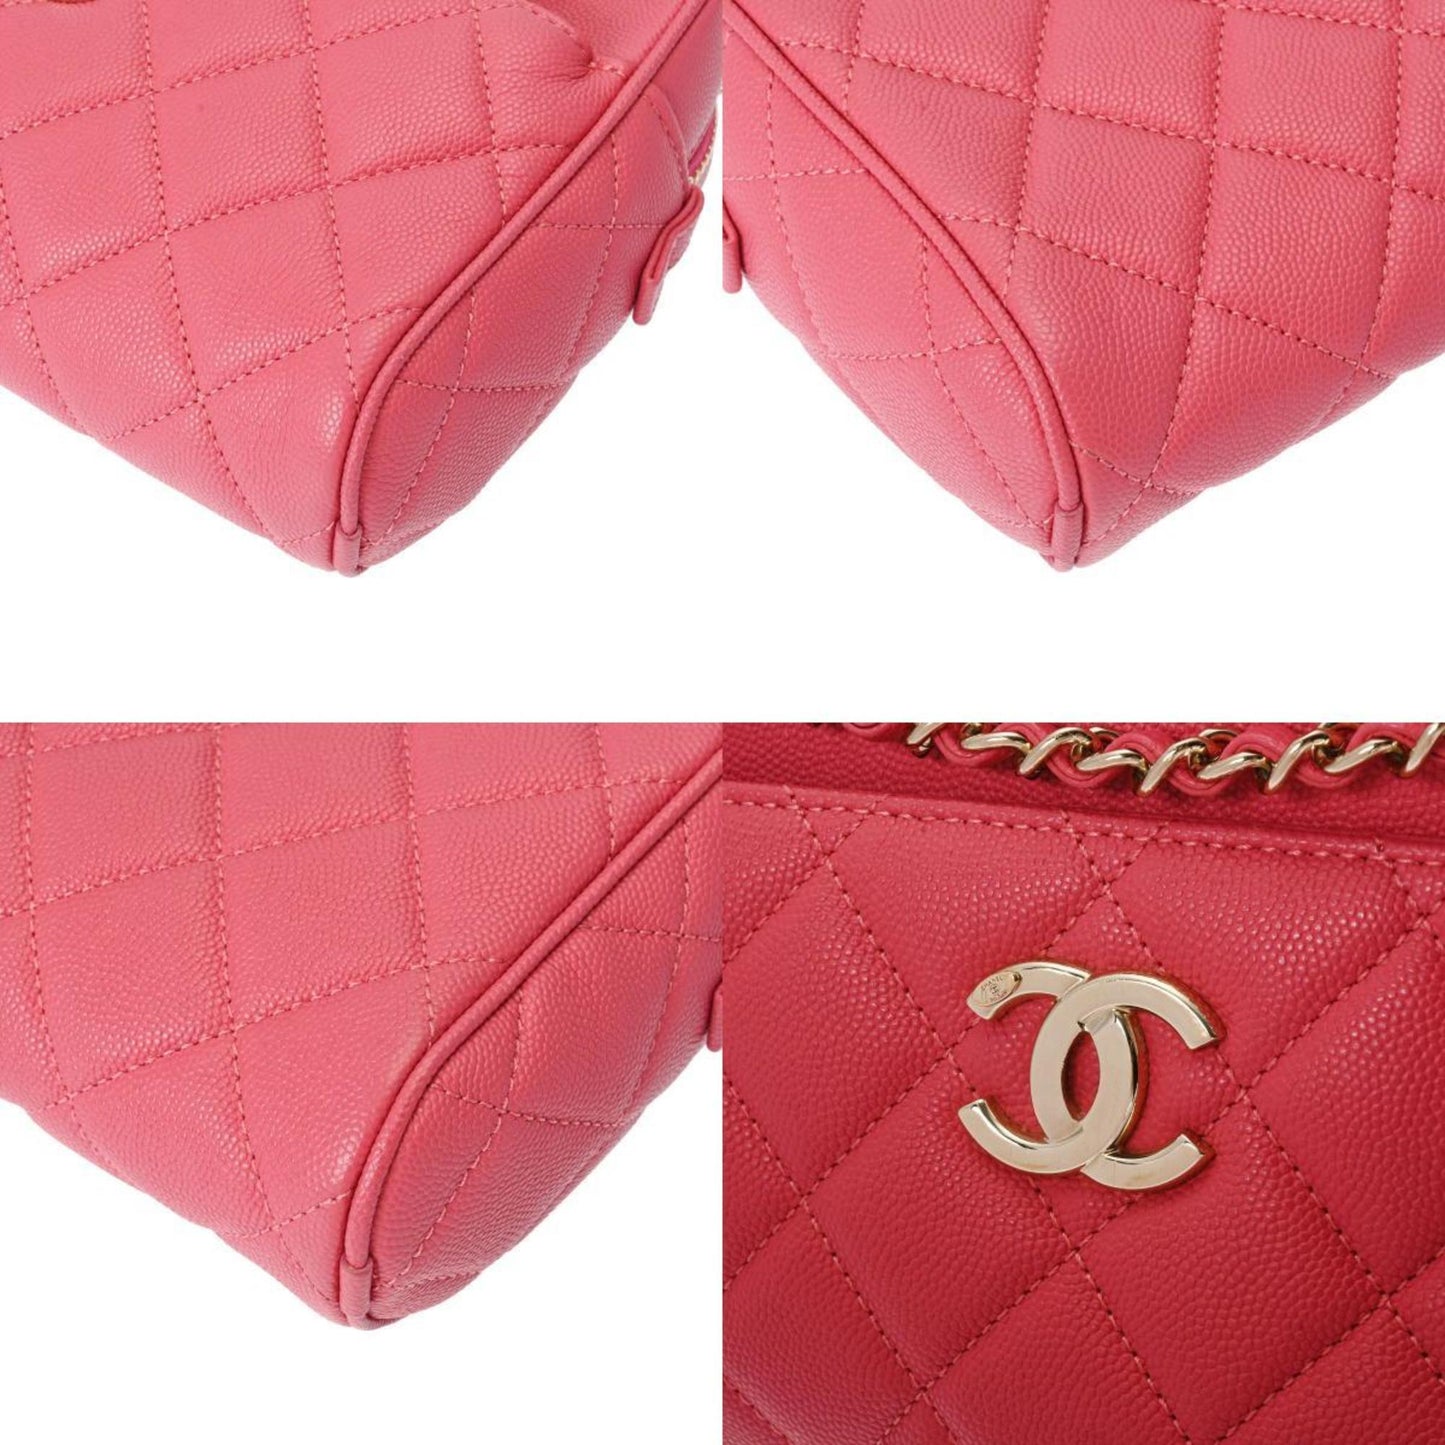 Chanel Women's Champagne Gold Caviar Leather Shoulder Bag in Pink